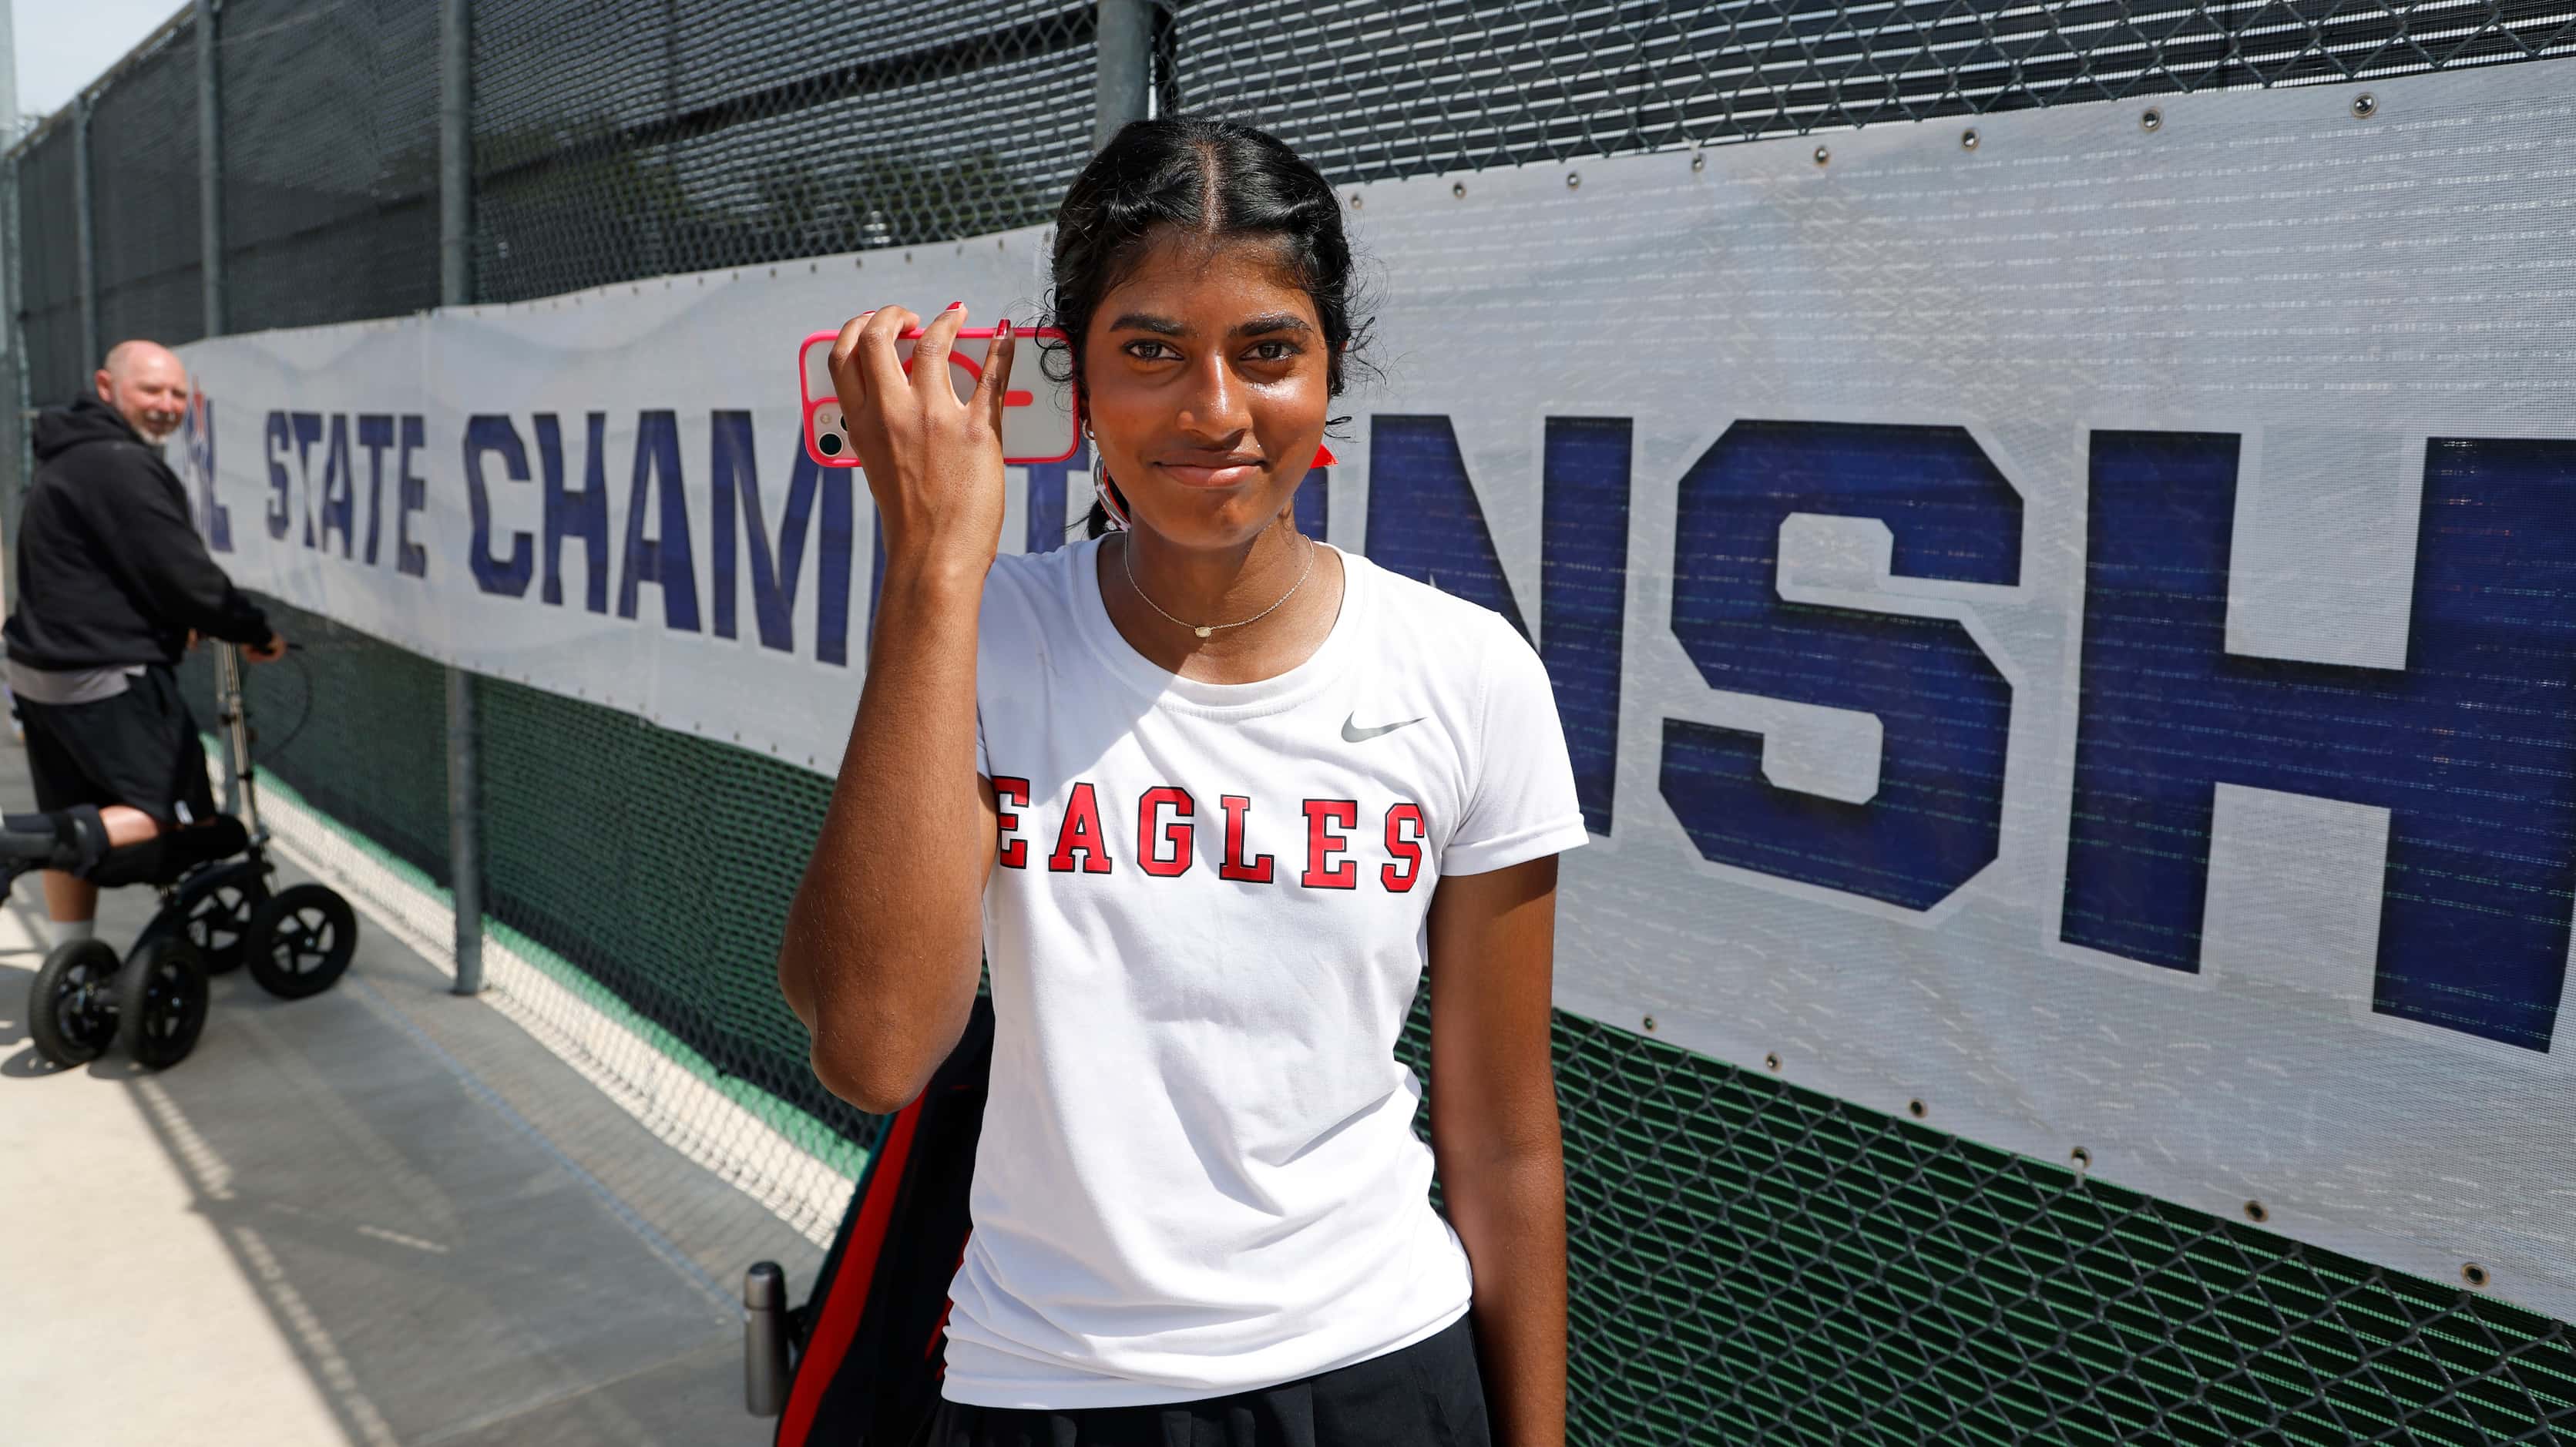 Meghna Arun Kumar, Argyle talks by phone with one of teammates that could not attend after...